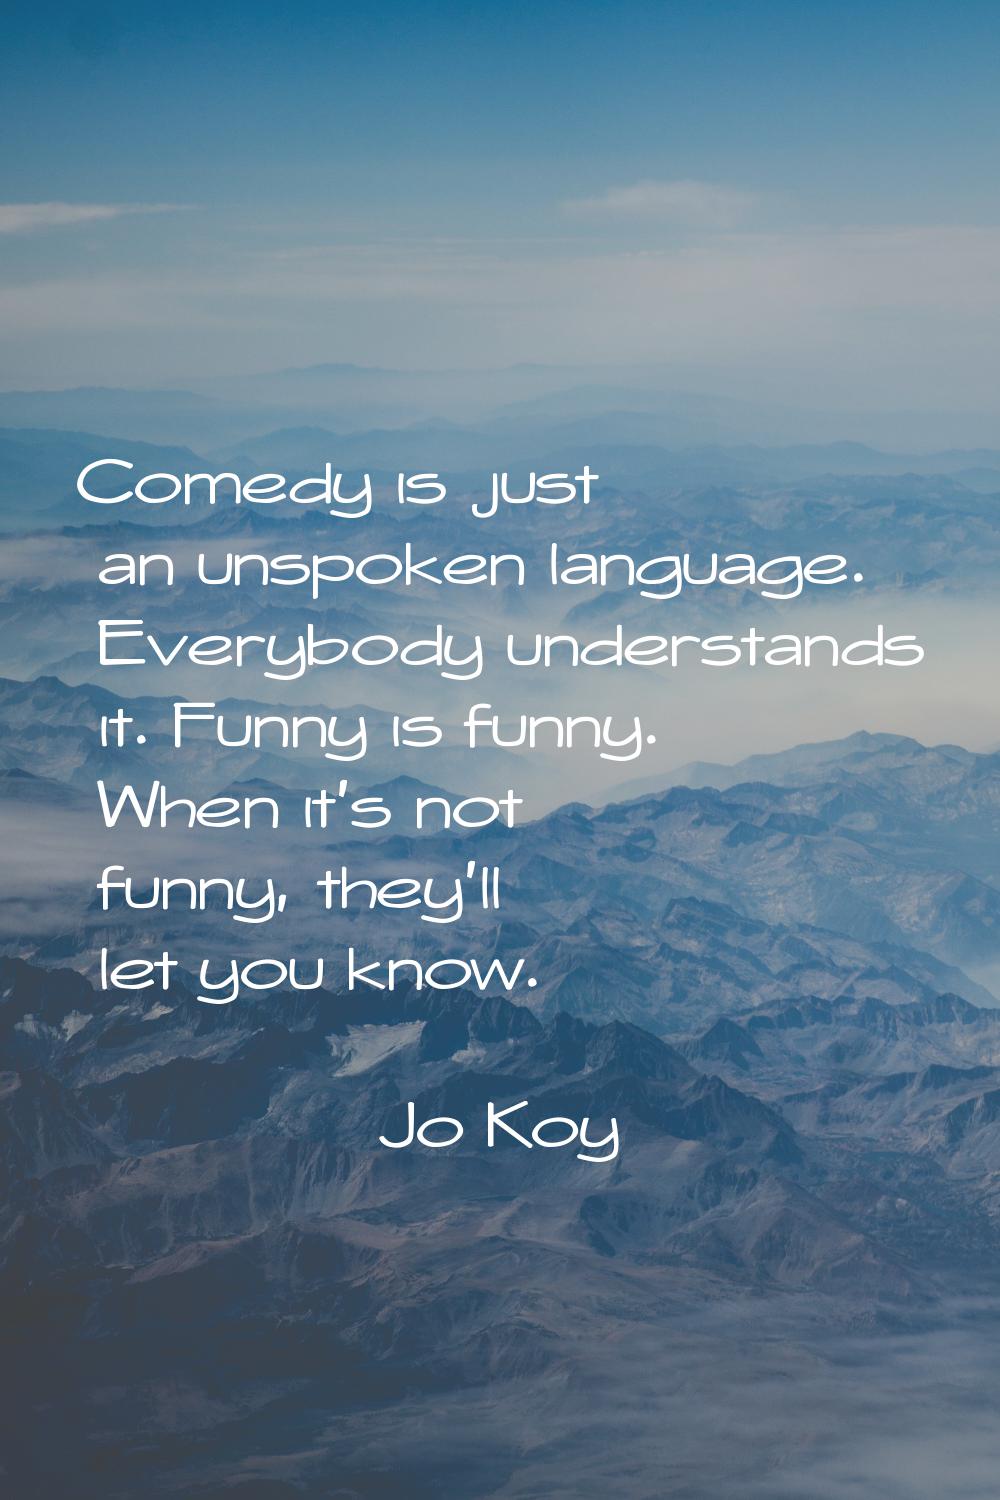 Comedy is just an unspoken language. Everybody understands it. Funny is funny. When it's not funny,